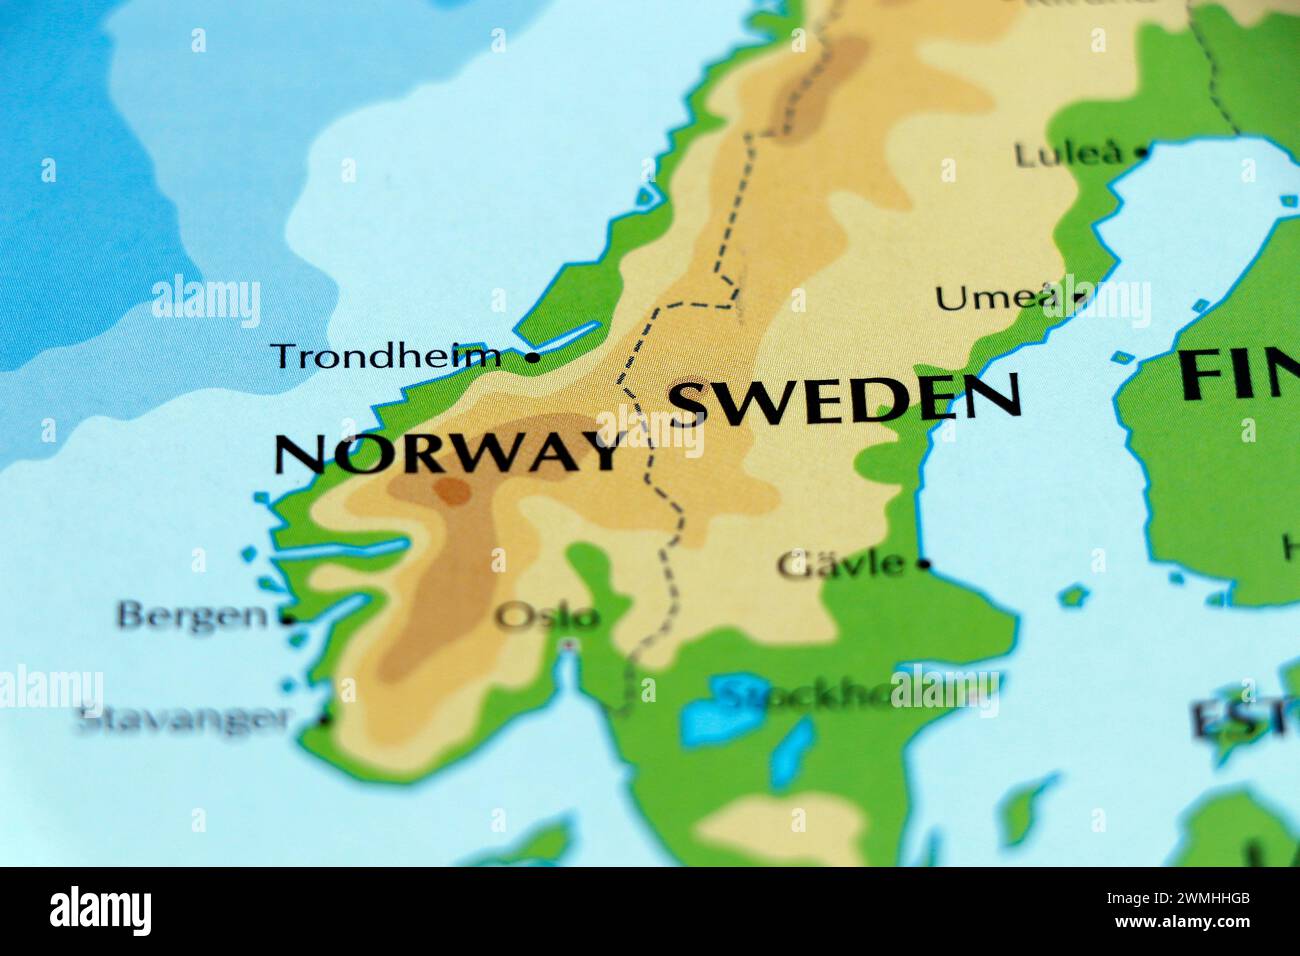 world map of europe, norway and sweden bordering country in close up Stock Photo